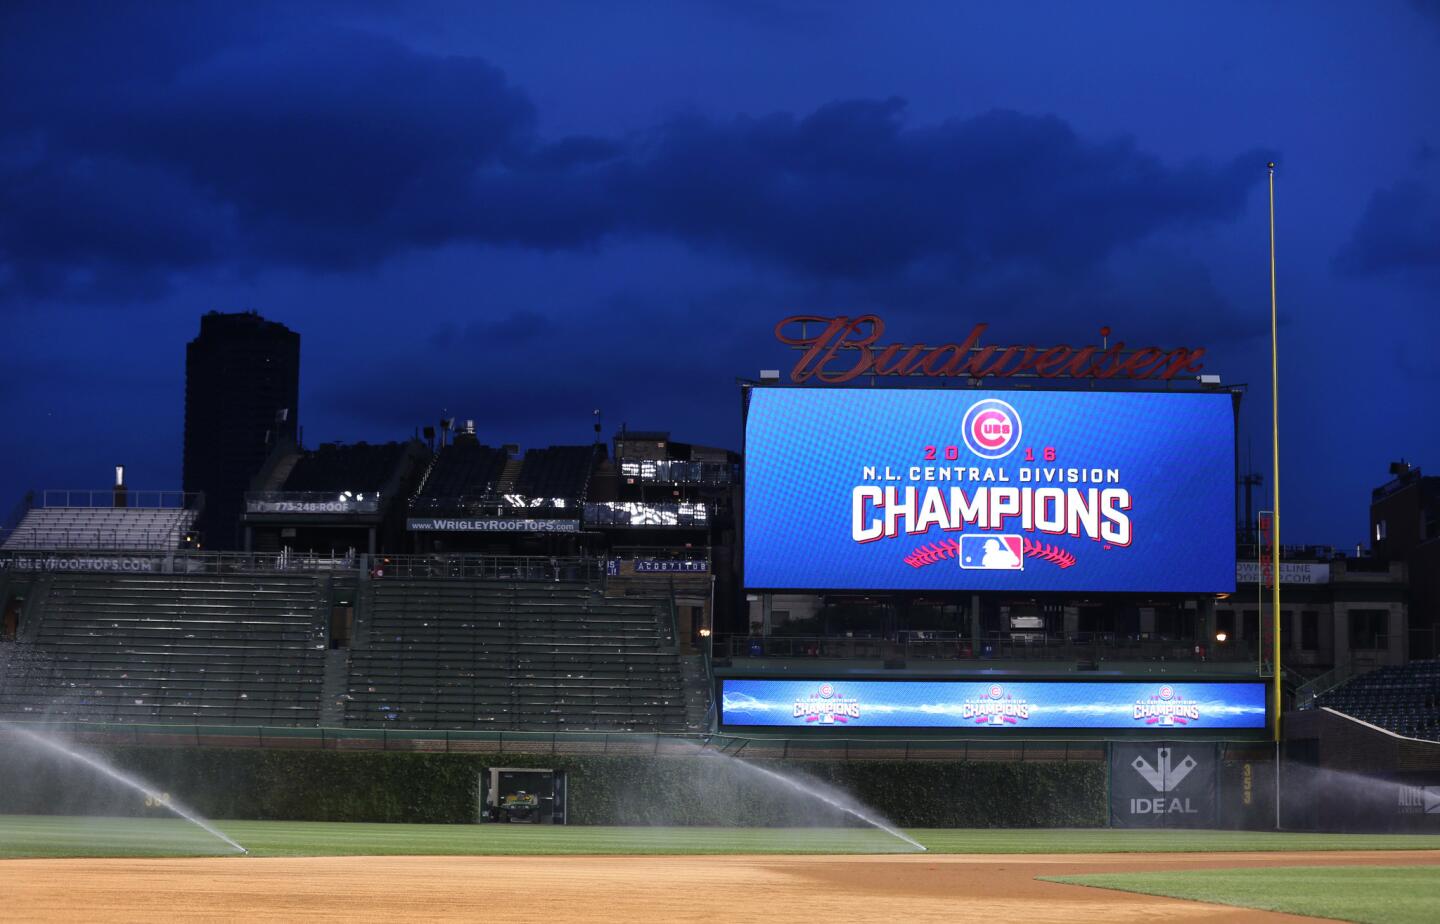 After all the Cubs' celebrations, the scoreboard still reads "2016 N.L. Central Division Champions" at Wrigley Field on Friday, Sept. 16, 2016.